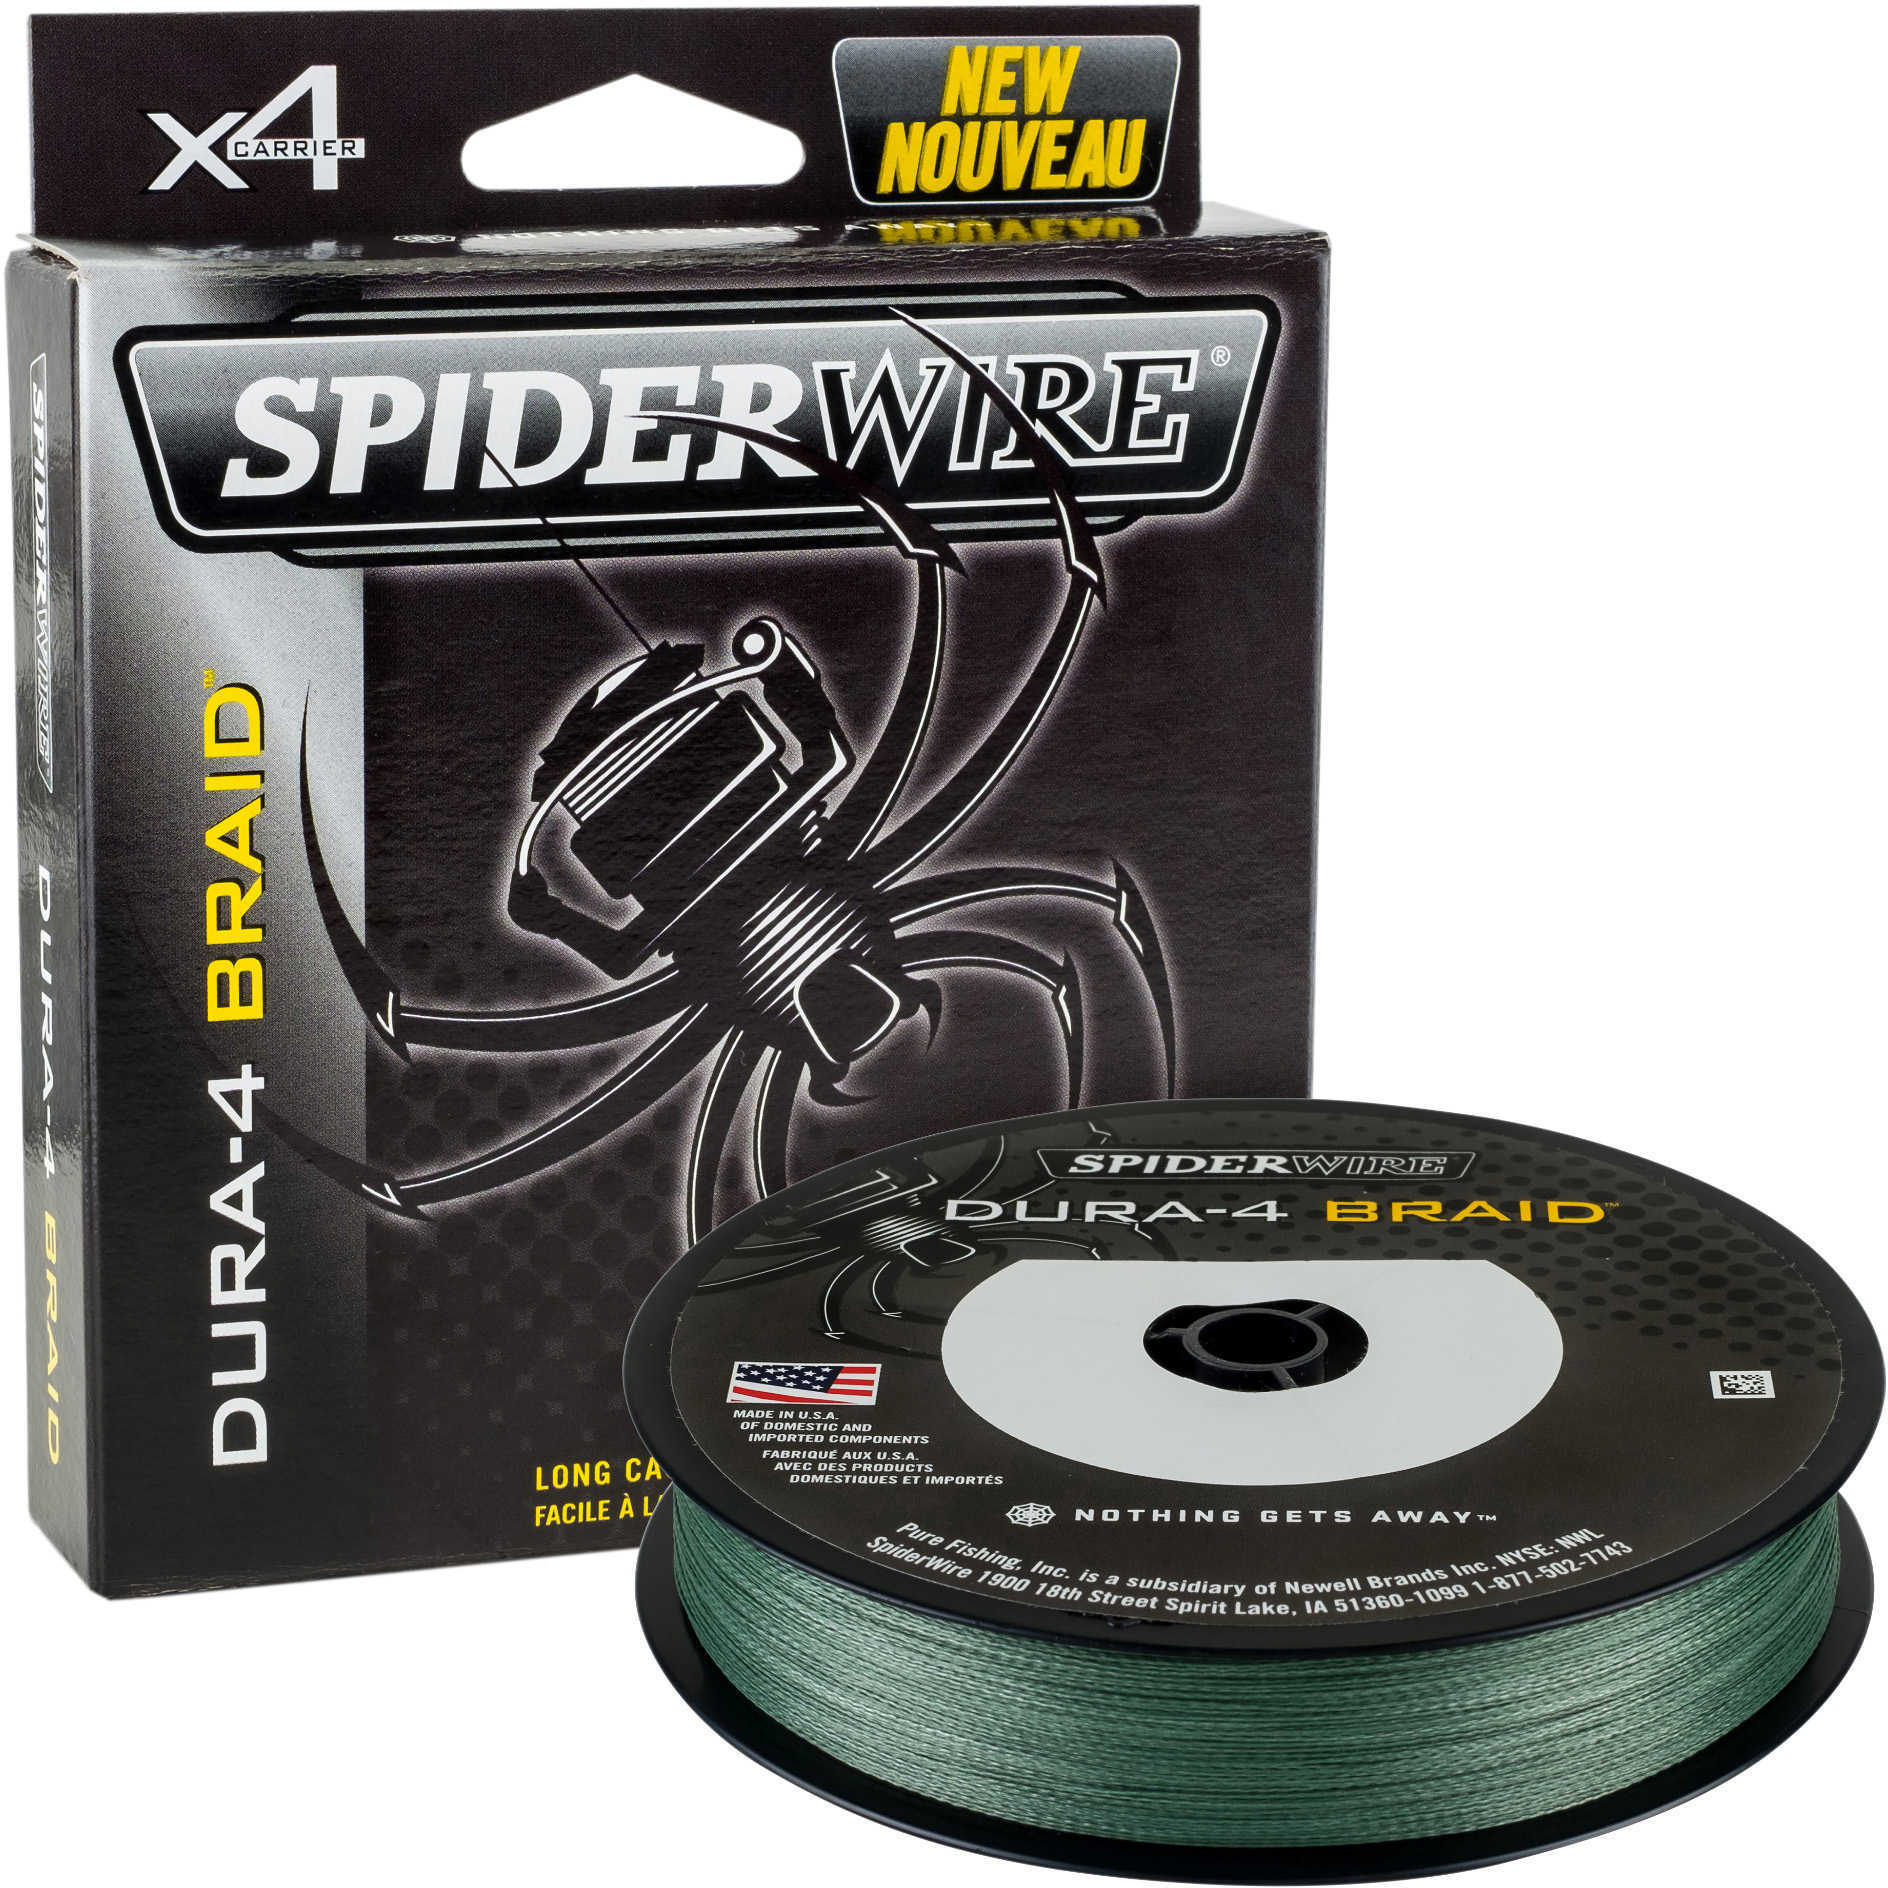 Spiderwire Dura-4 Braided Line 200 Yards , 65 lbs Tested, 0.015" Diameter, Moss Green